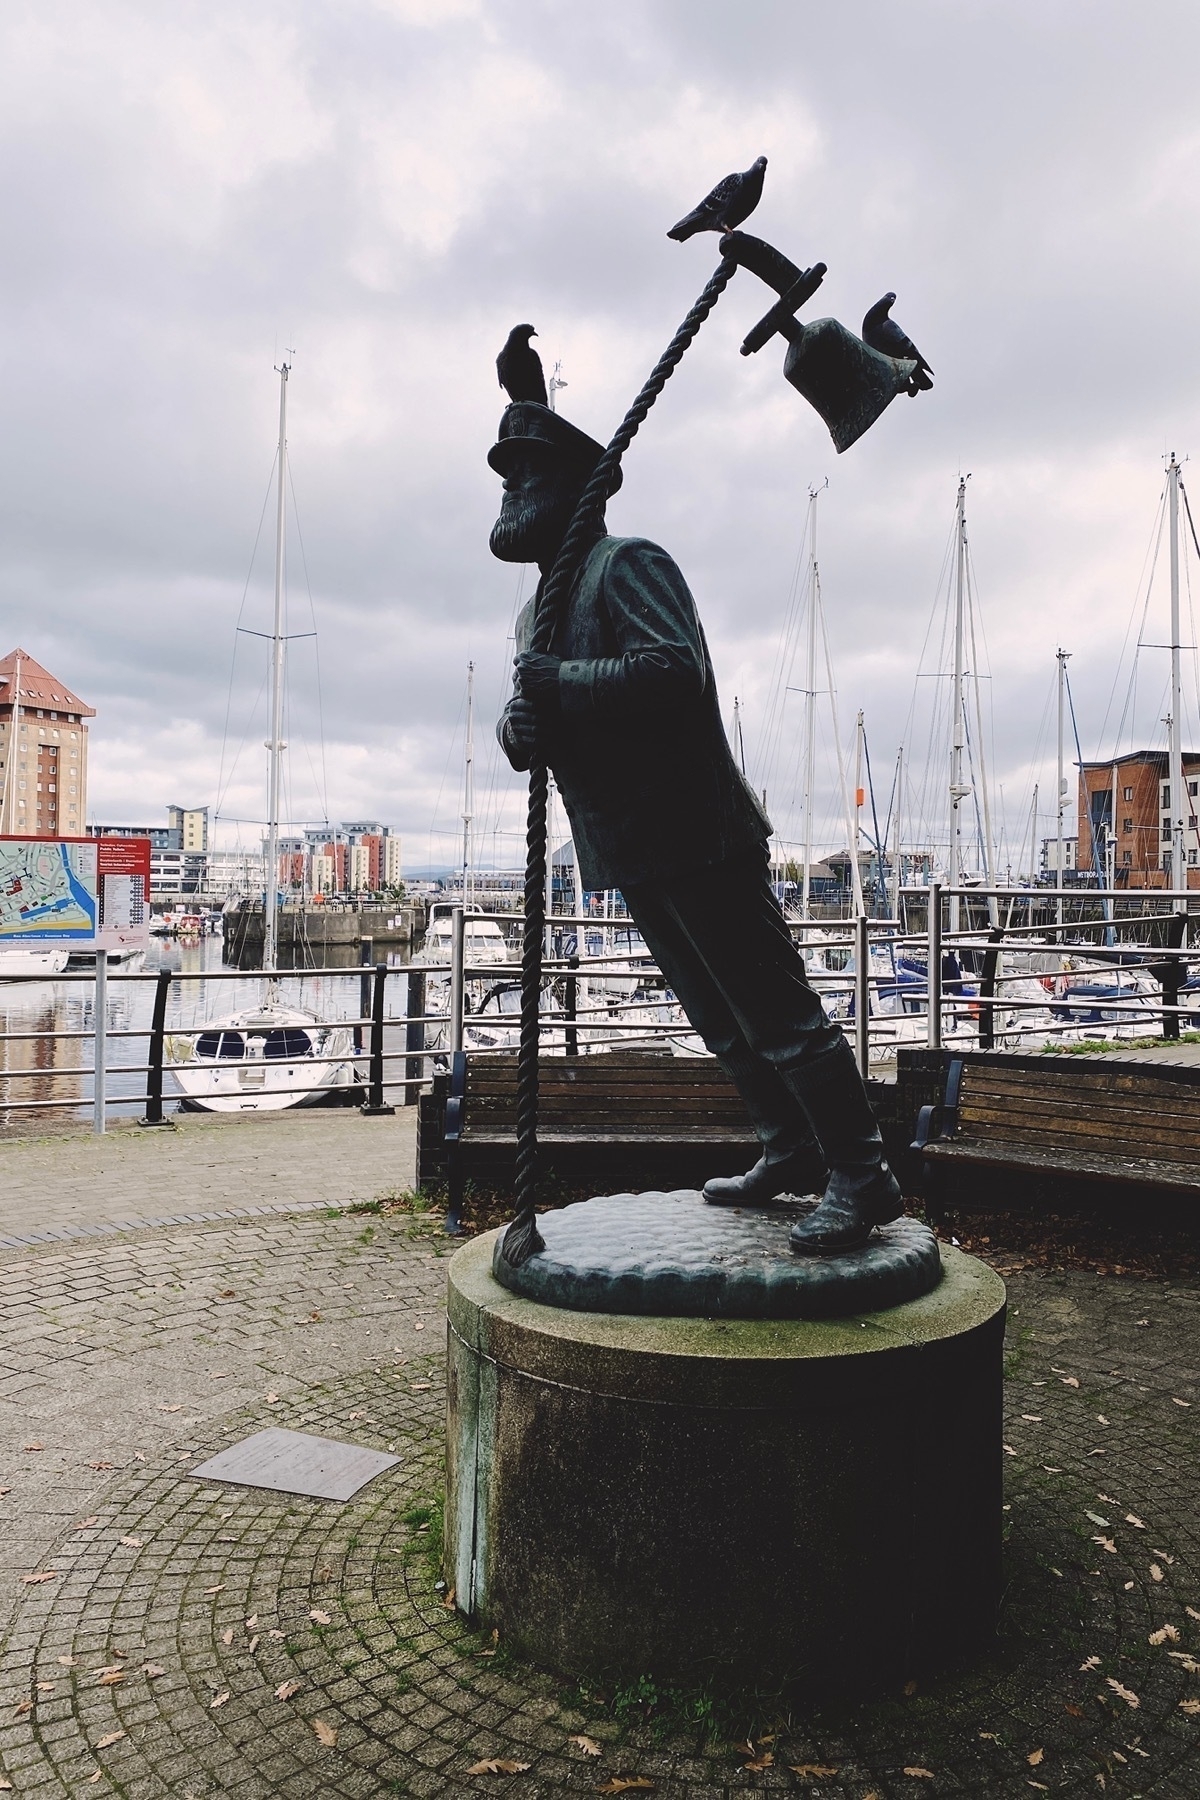 Statue of a sea captain leaning forward grasping a rope with bell attached. Three pigeond perched on statue. Moored boats in background.